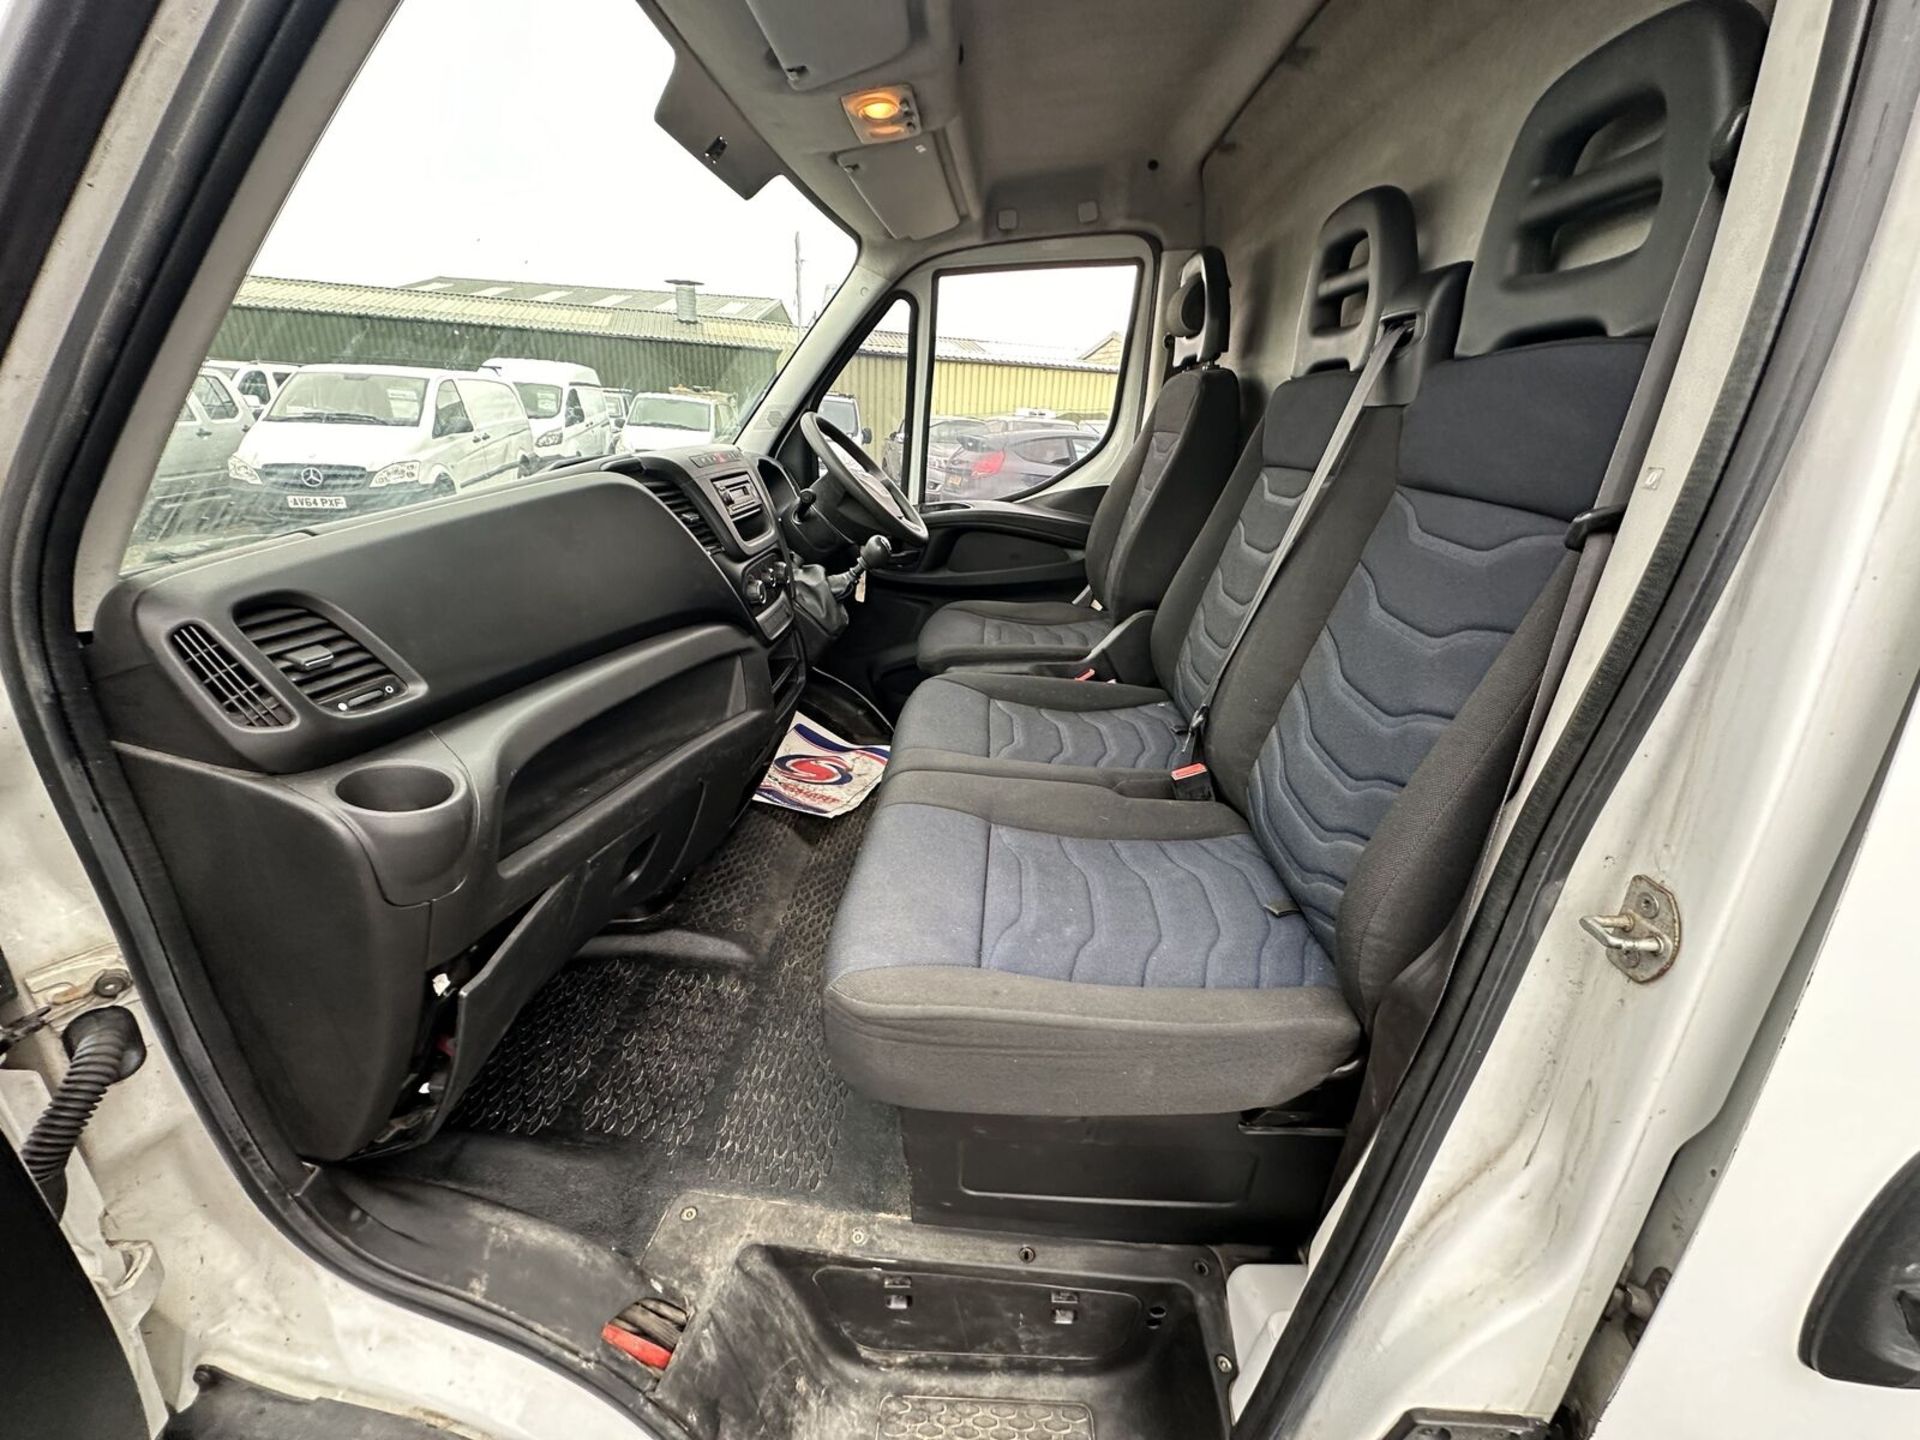 TURBO TROUBLE: 2018 IVECO DAILY HIGH ROOF VAN - ULEZ EURO 6 DEAL - Image 9 of 18